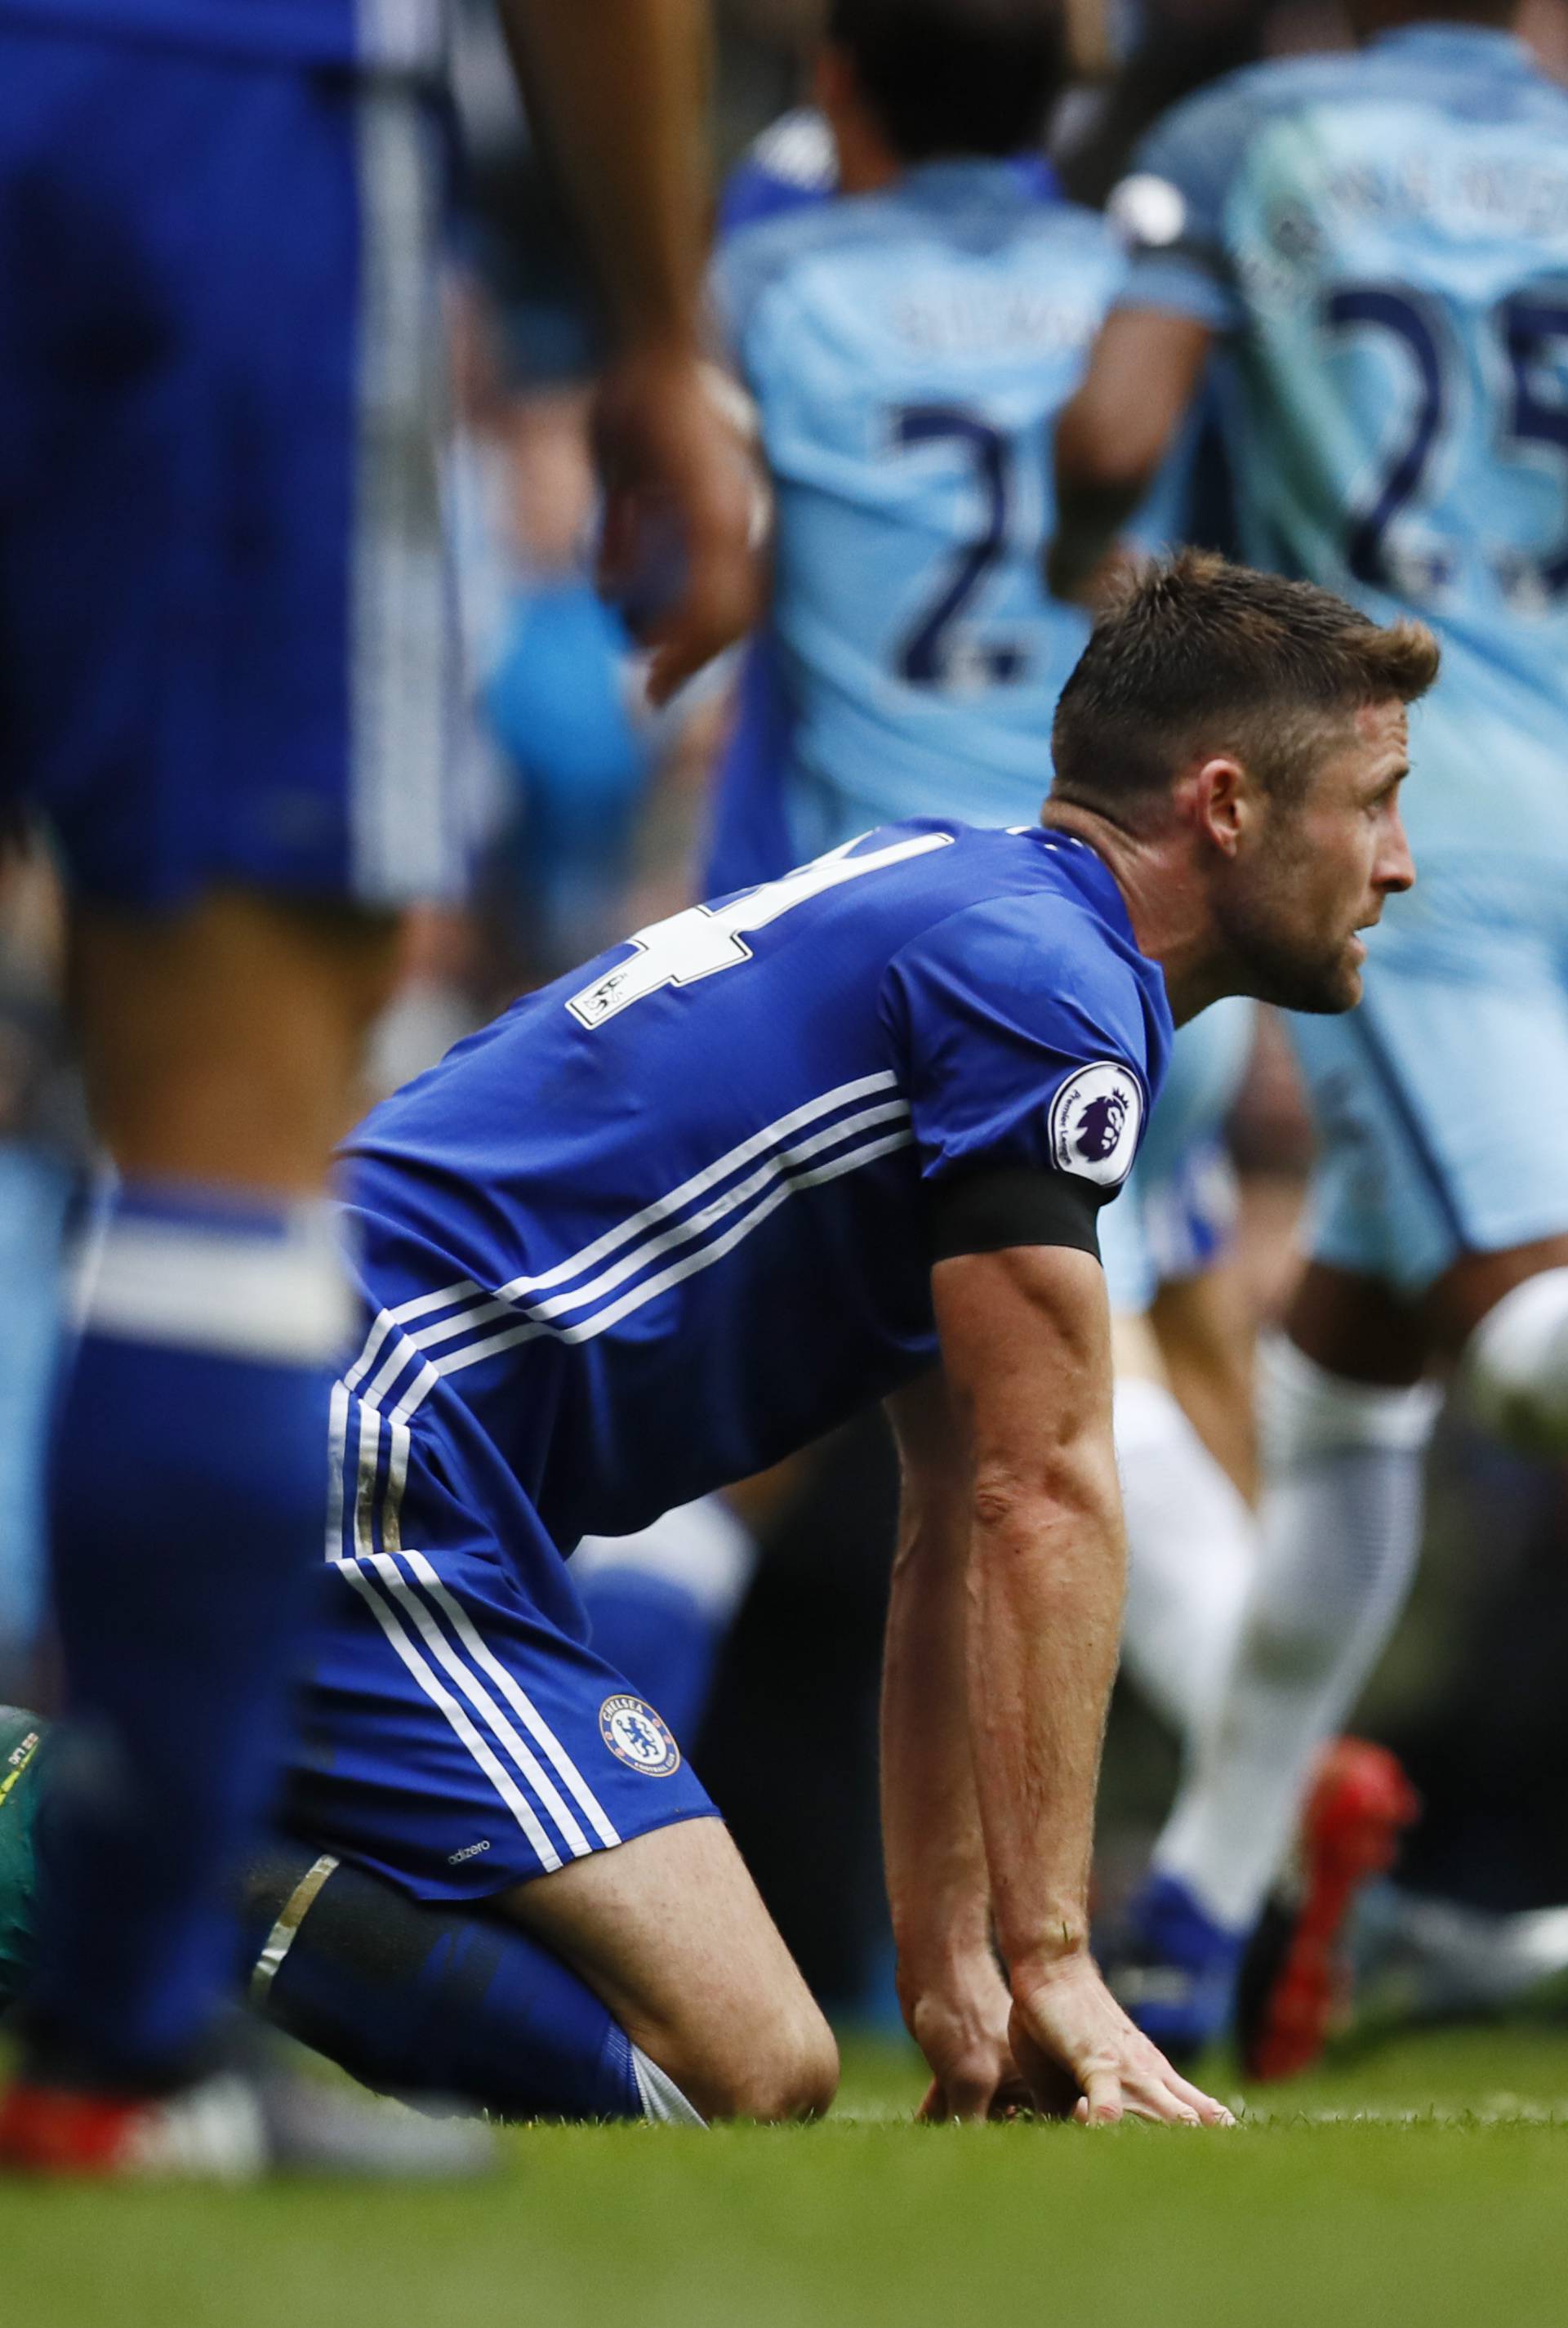 Chelsea's Gary Cahill looks dejected after scoring an own goal and the first goal for Manchester City